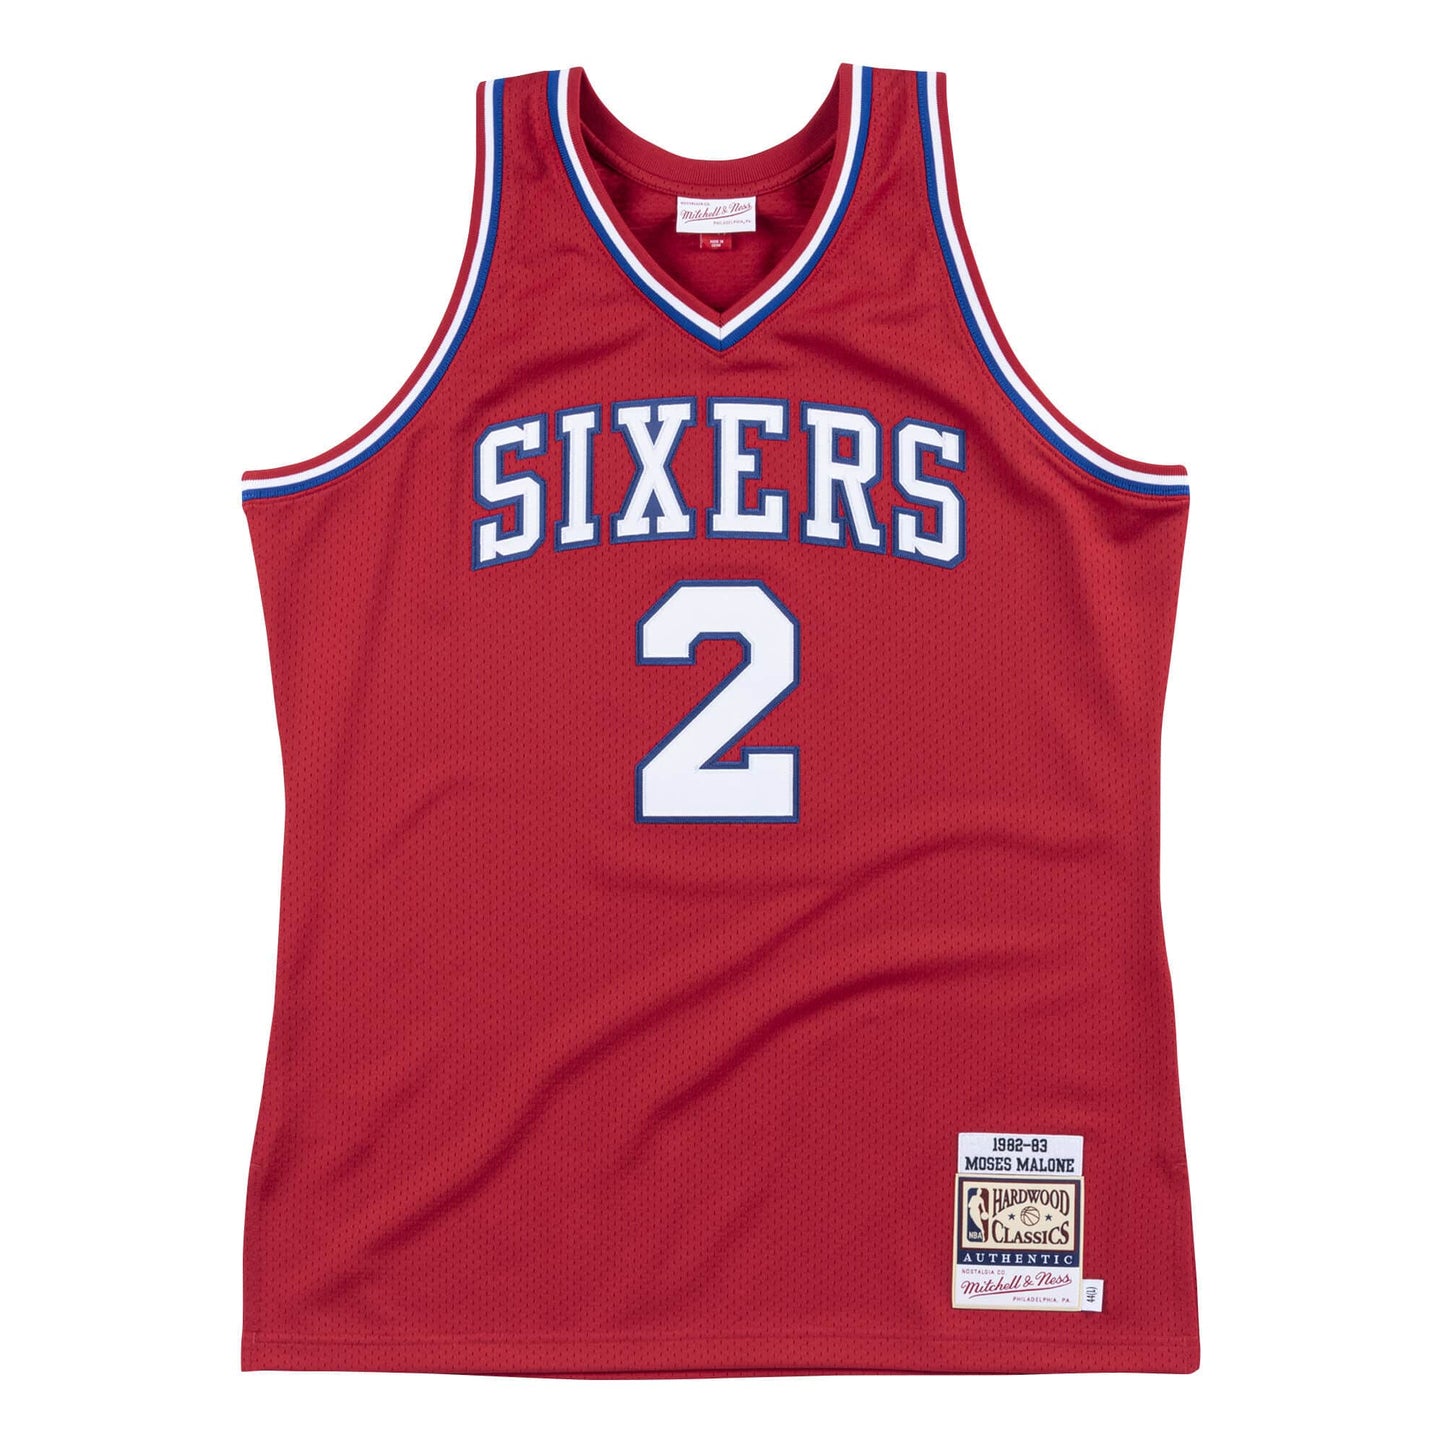 Authentic Jersey Philadelphia 76ers 1982-83 Moses Malone